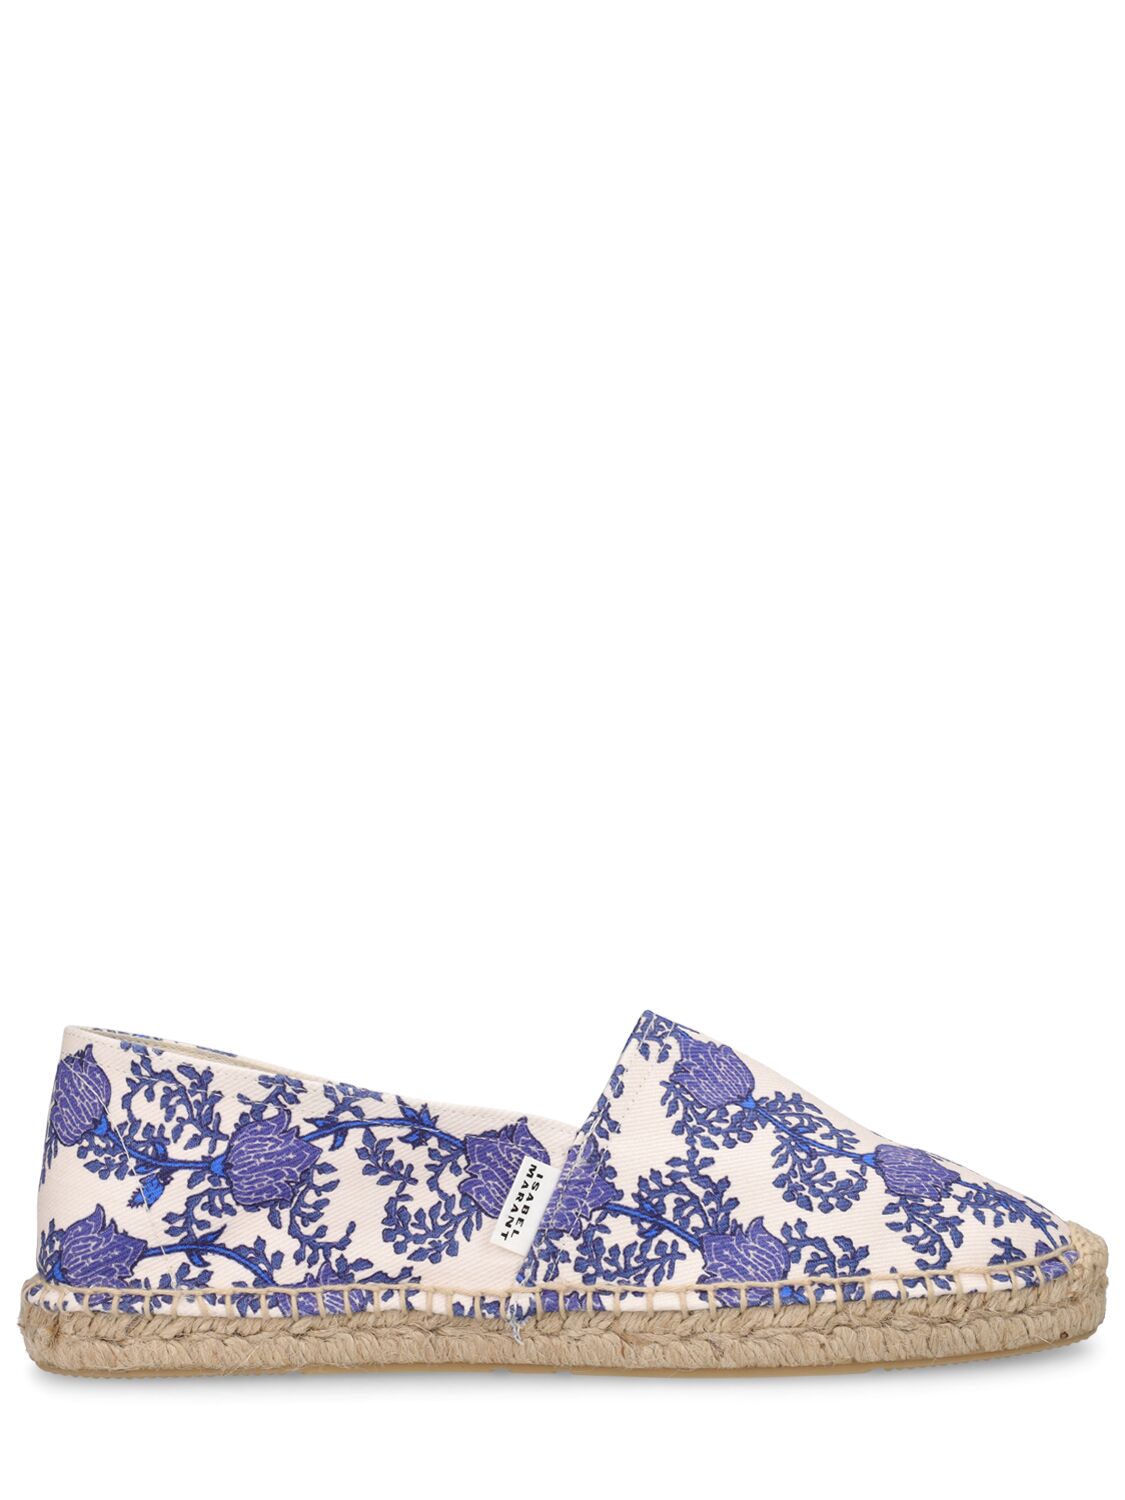 Isabel Marant Canae Printed Canvas Espadrilles In Blue